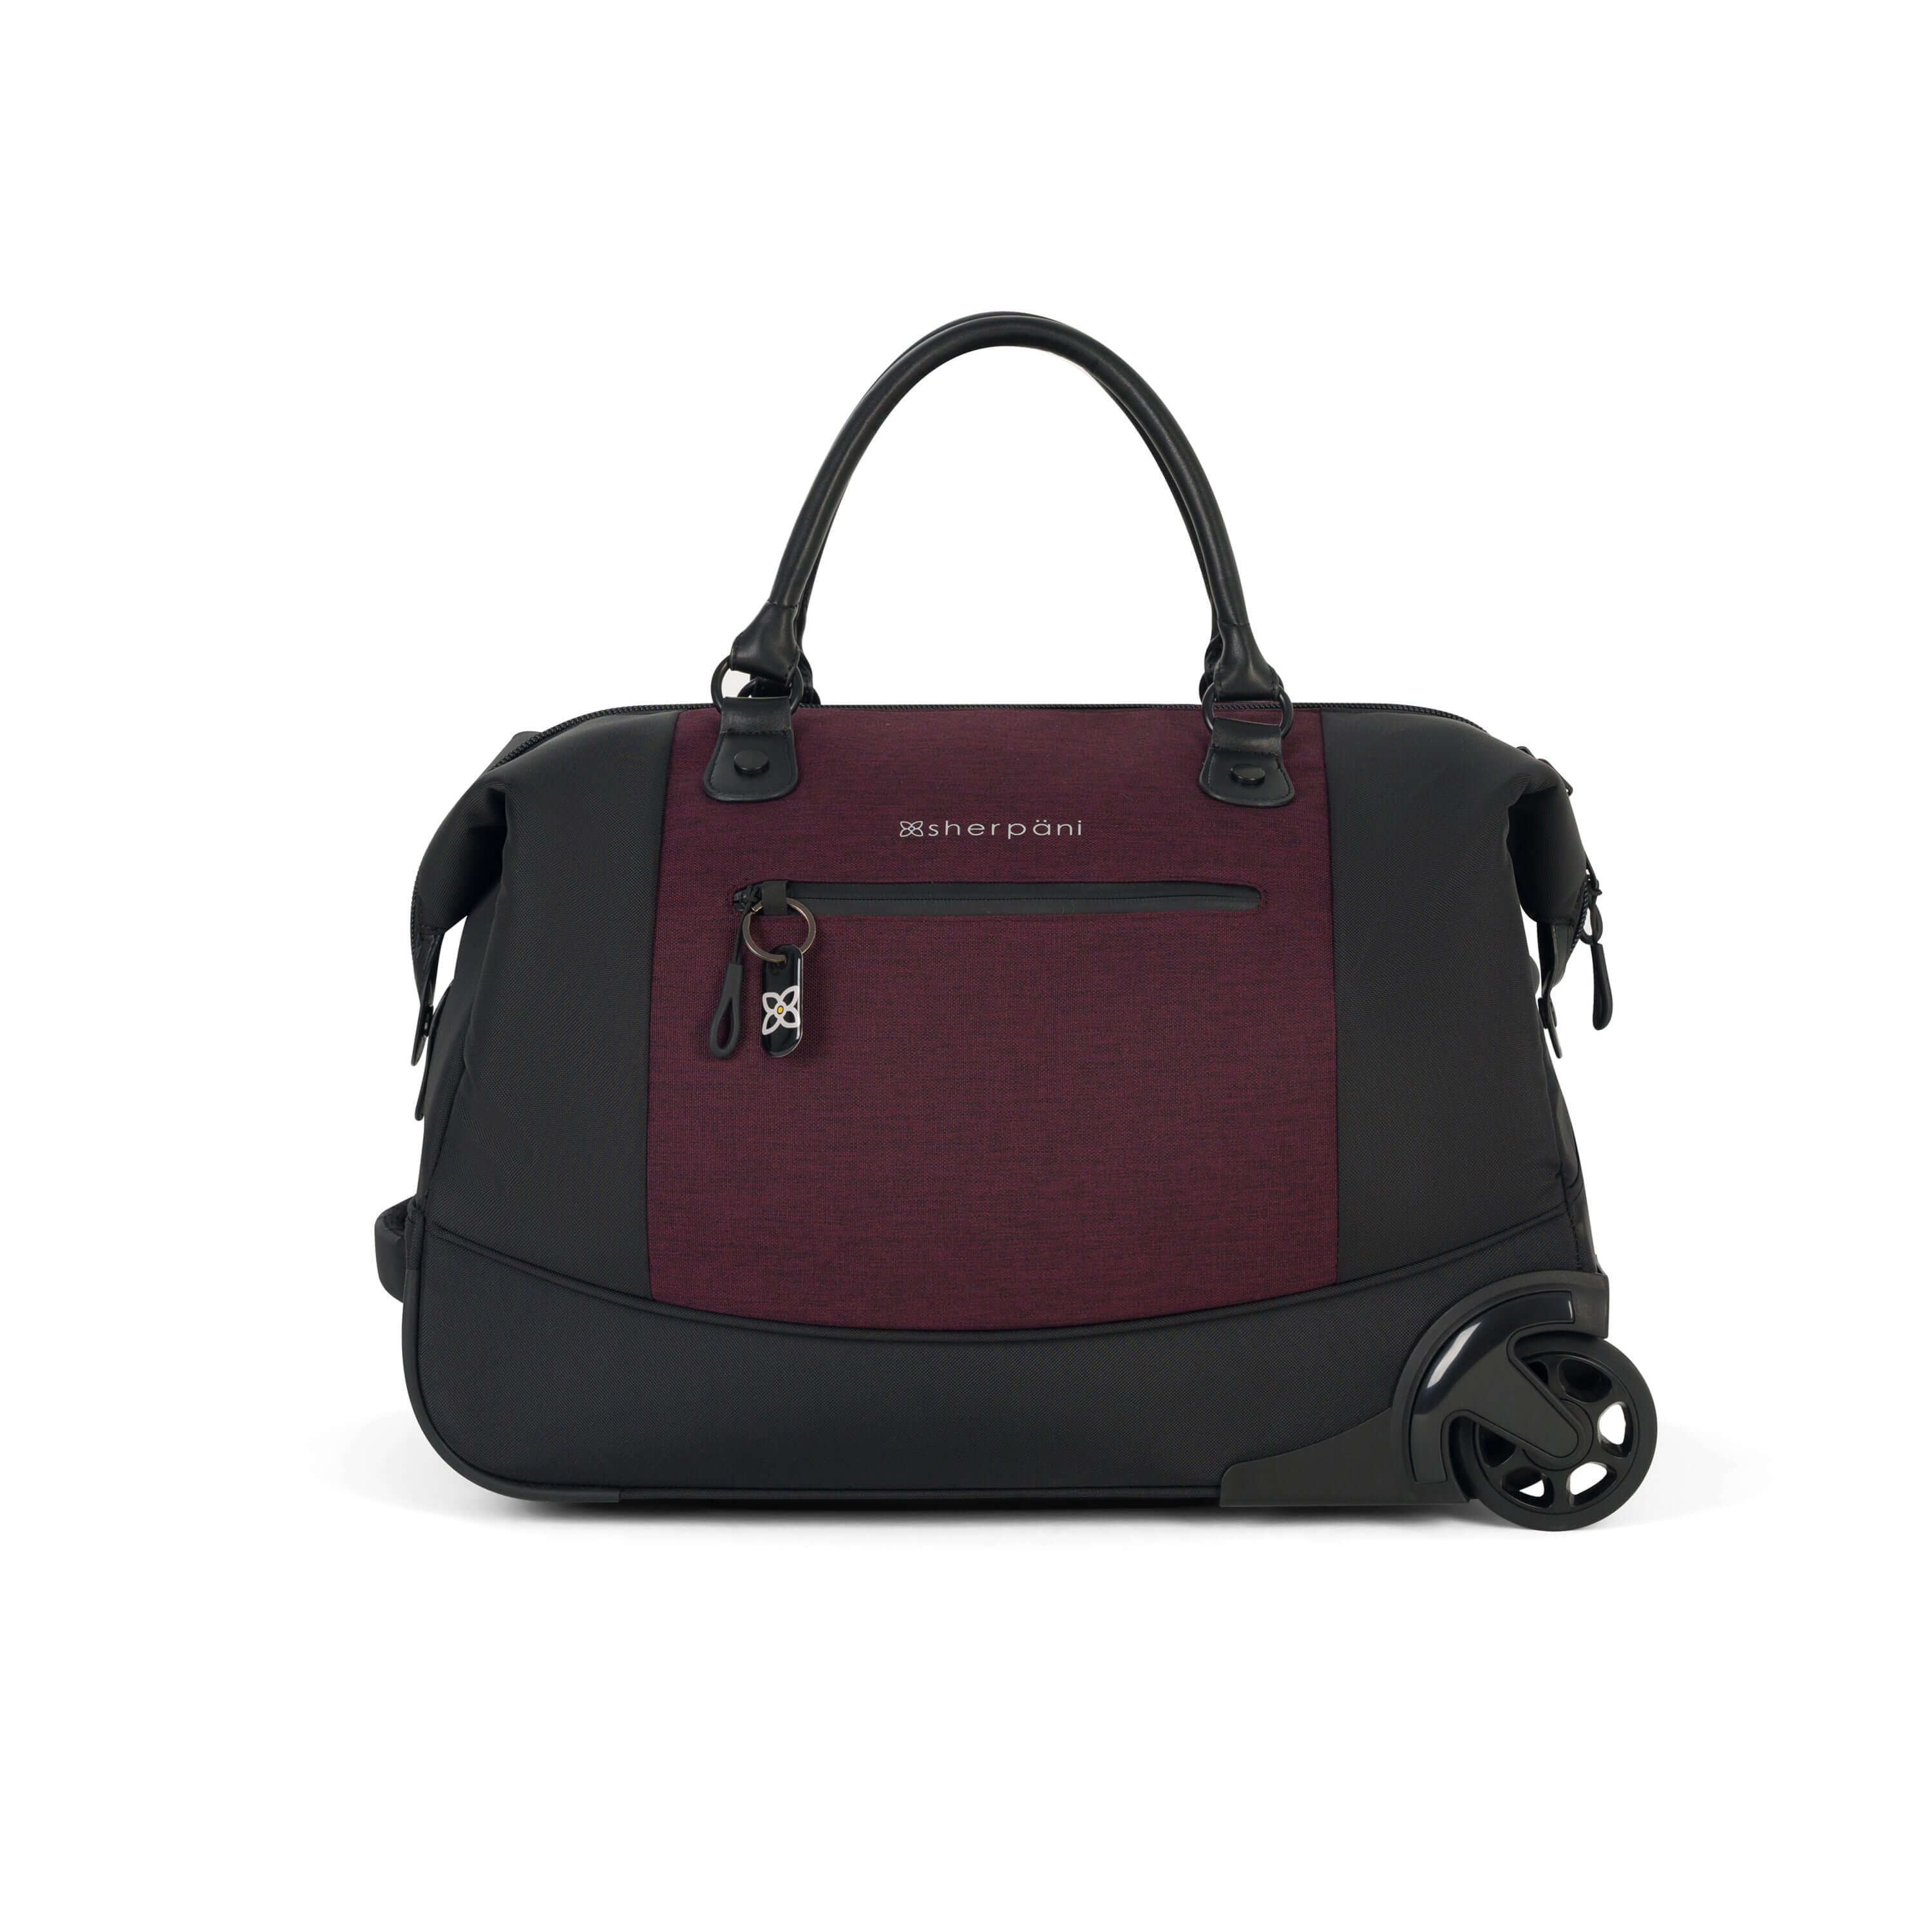 Flat front view of Sherpani’s Anti Theft rolling Duffle, the Trip in Merlot, with vegan leather accents in black. The bag lies flat on the ground with a retractable luggage handle hidden on the left side and the rolling wheels shown on the right side. The bag features short tote handles at the top and an external zipper compartment on the front panel with locking zipper and ReturnMe tag. 